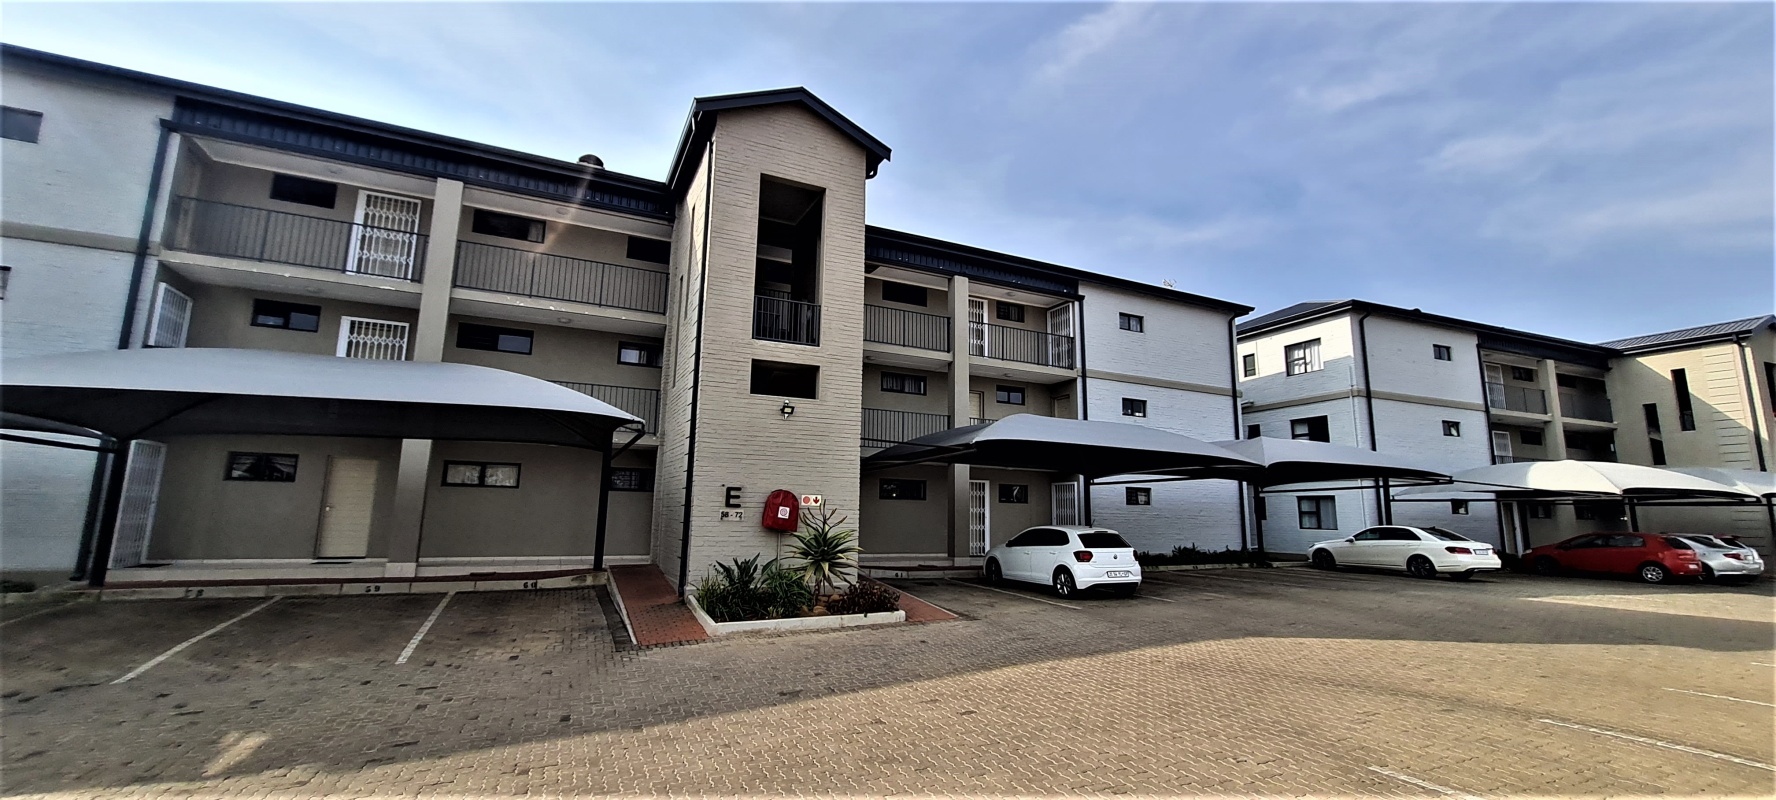 2 Bedroom Apartment / Flat  For Sale in Brentwood | 1353463 | Property.CoZa